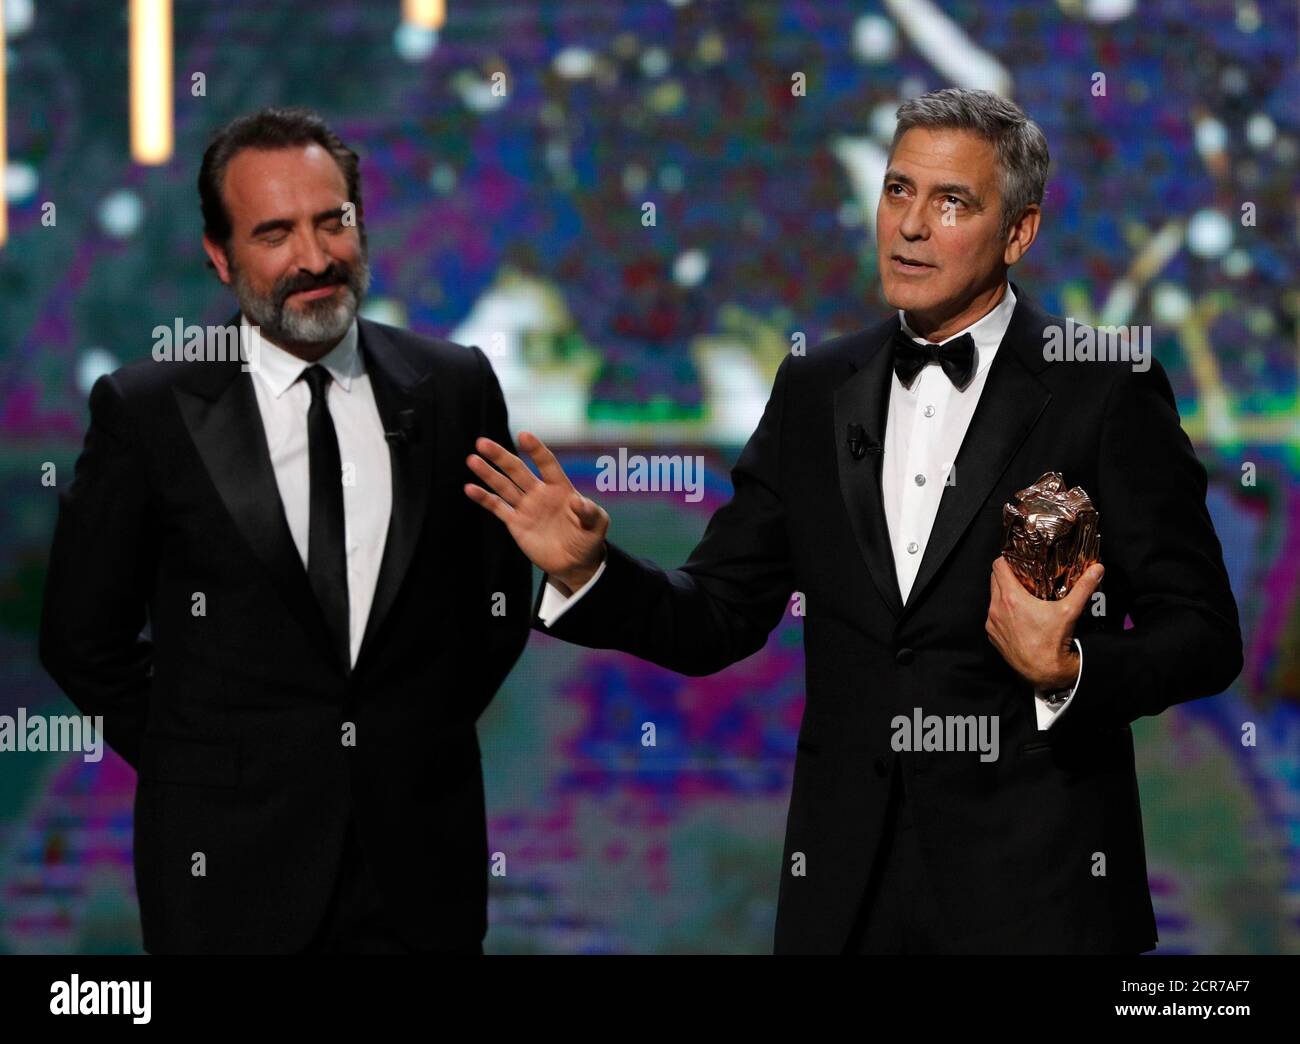 Actor George Clooney (R) delivers a speech next to actor Jean Dujardin as  he receives an Honorary Cesar Award at the 42nd Cesar Awards ceremony in  Paris, France, February 24, 2017. REUTERS/Philippe